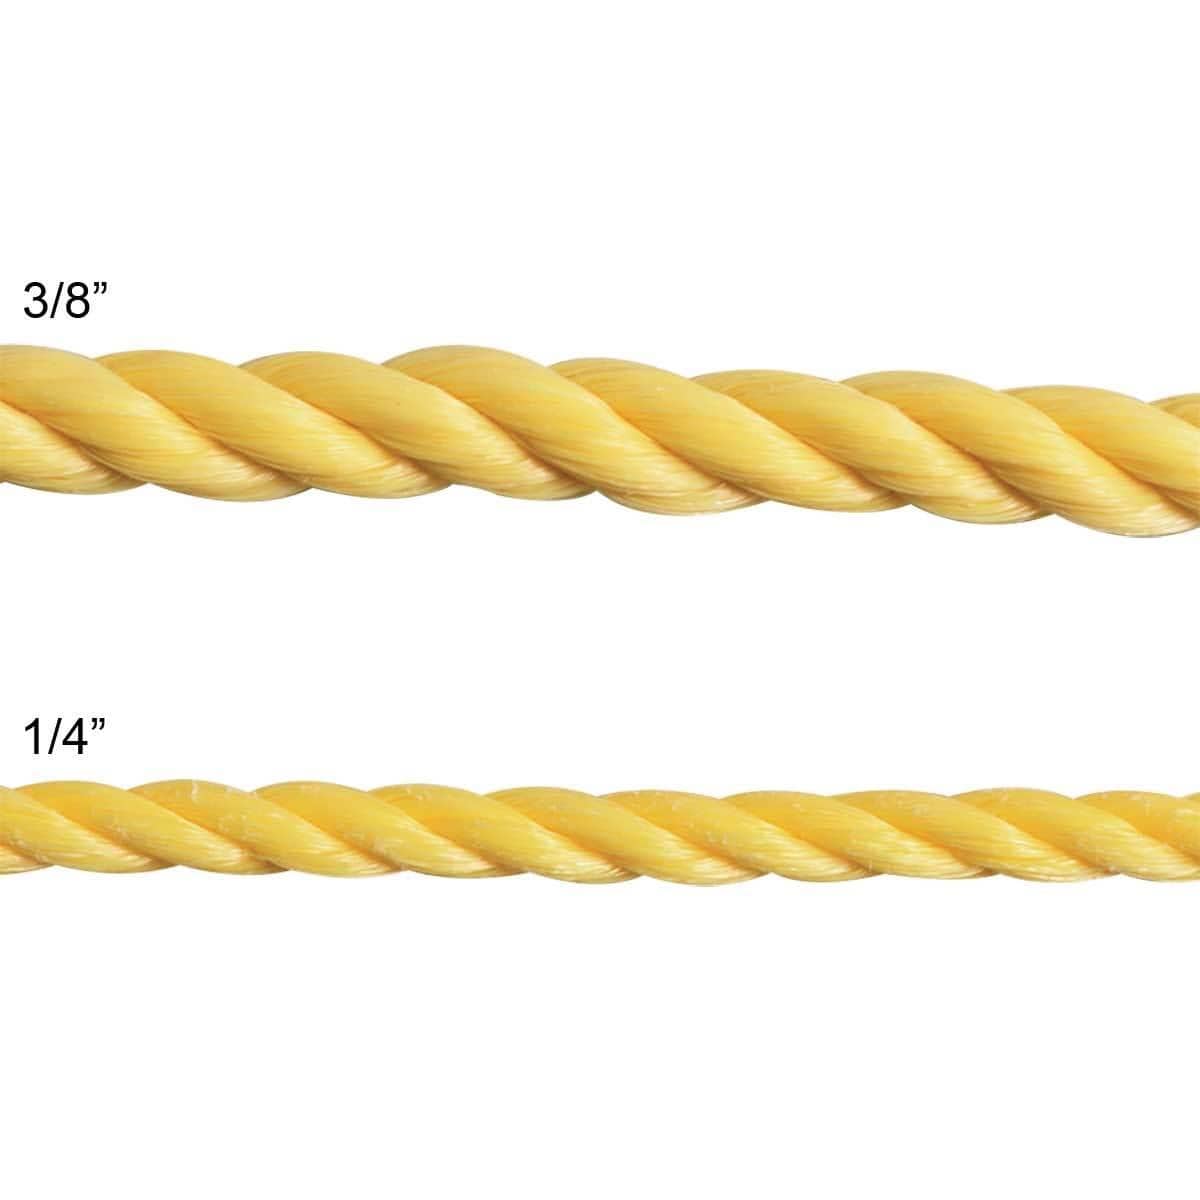 Bulk Twisted Polypropylene Rope, 1/4 by Gemplers